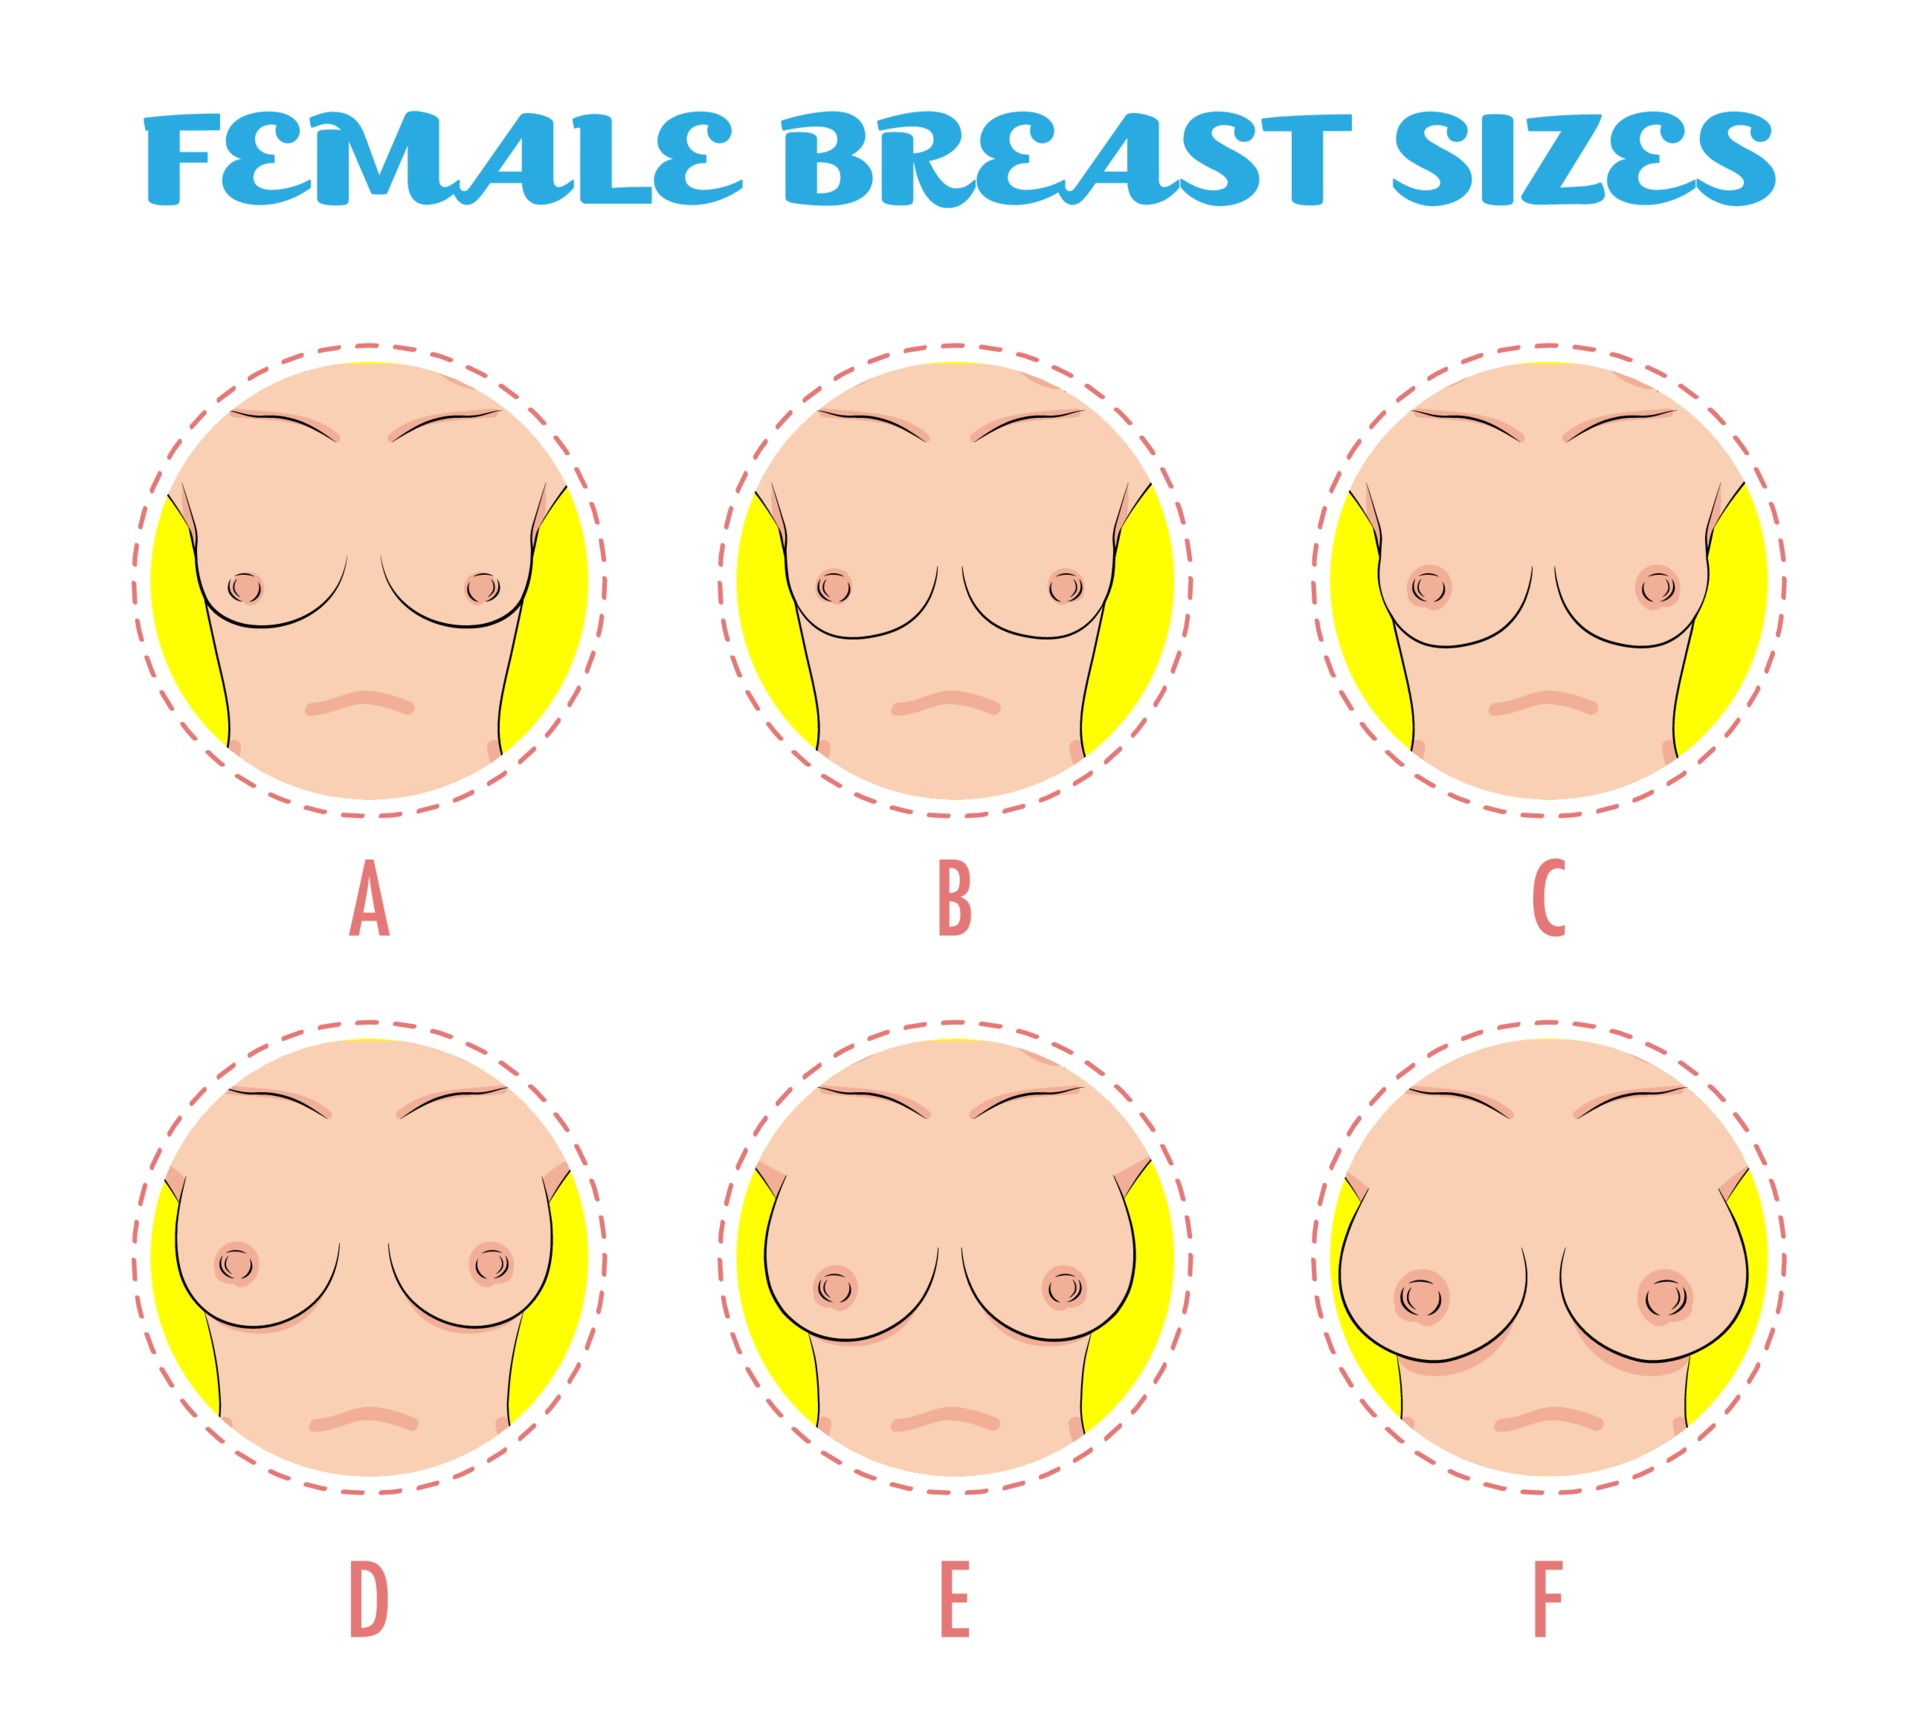 https://static.vecteezy.com/system/resources/previews/003/420/594/original/set-of-colored-round-icons-of-different-female-breast-size-body-vector.jpg